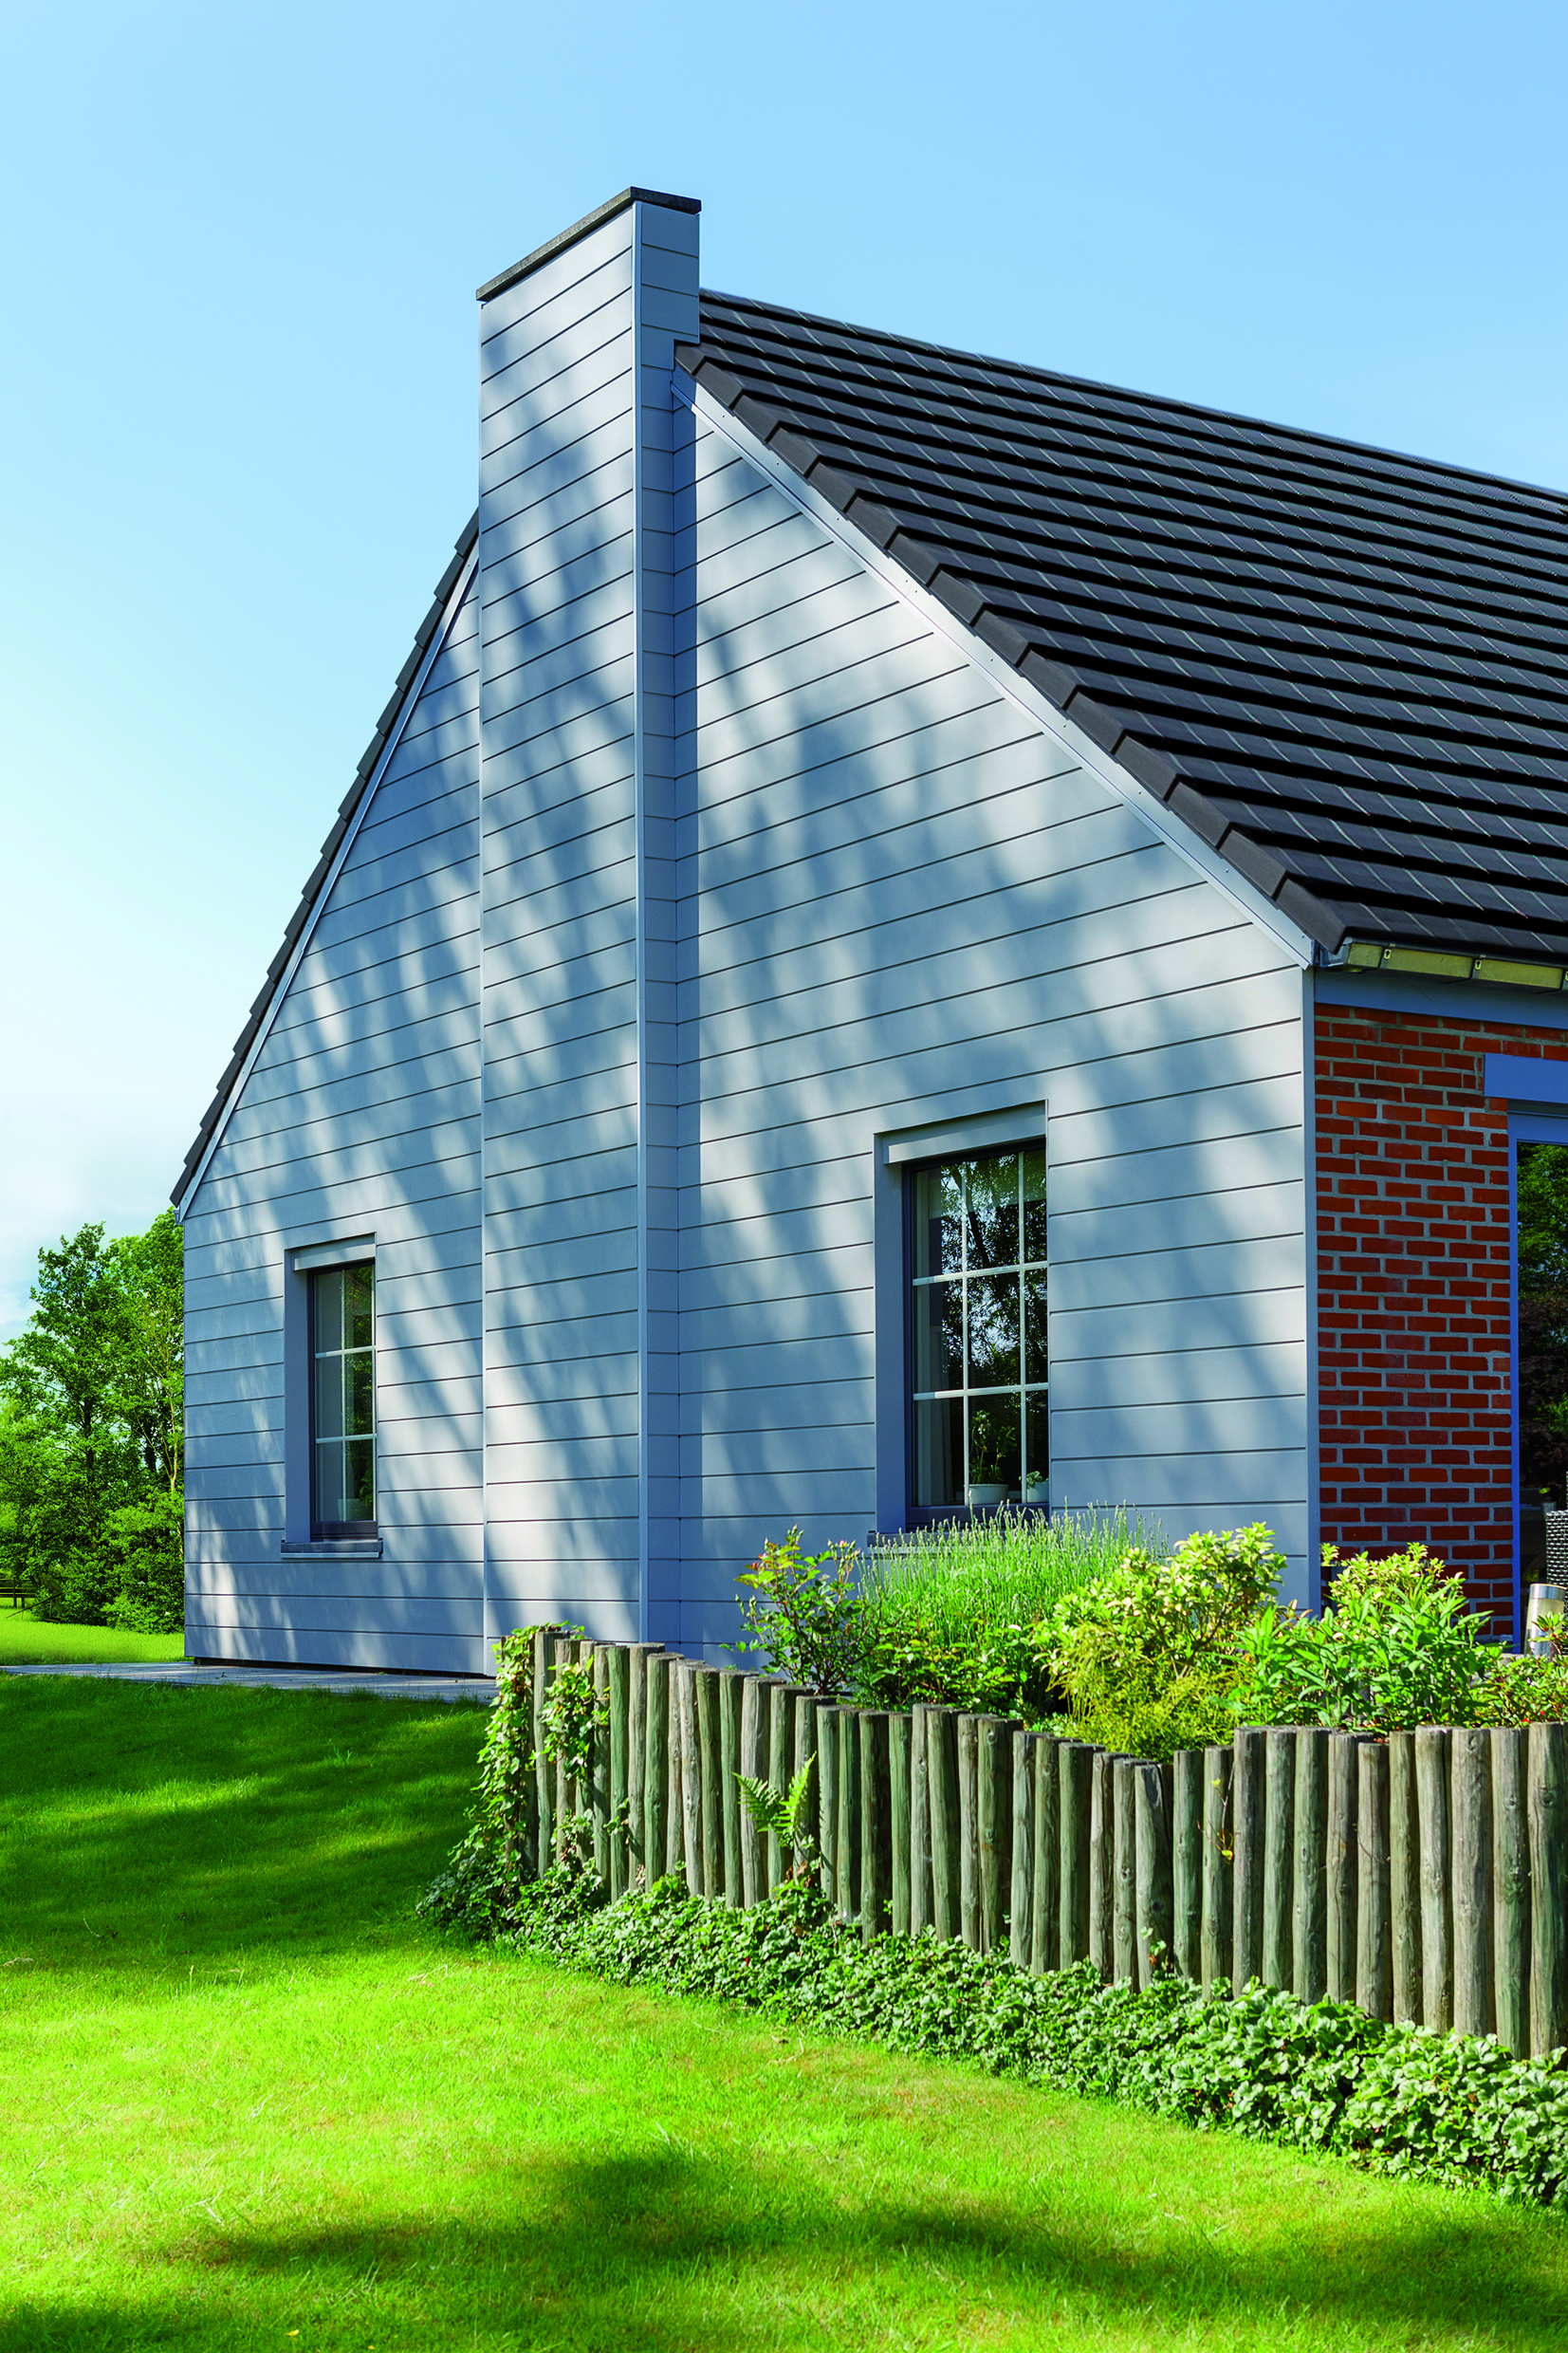 6 reasons to choose for cedral clading weatherboard house